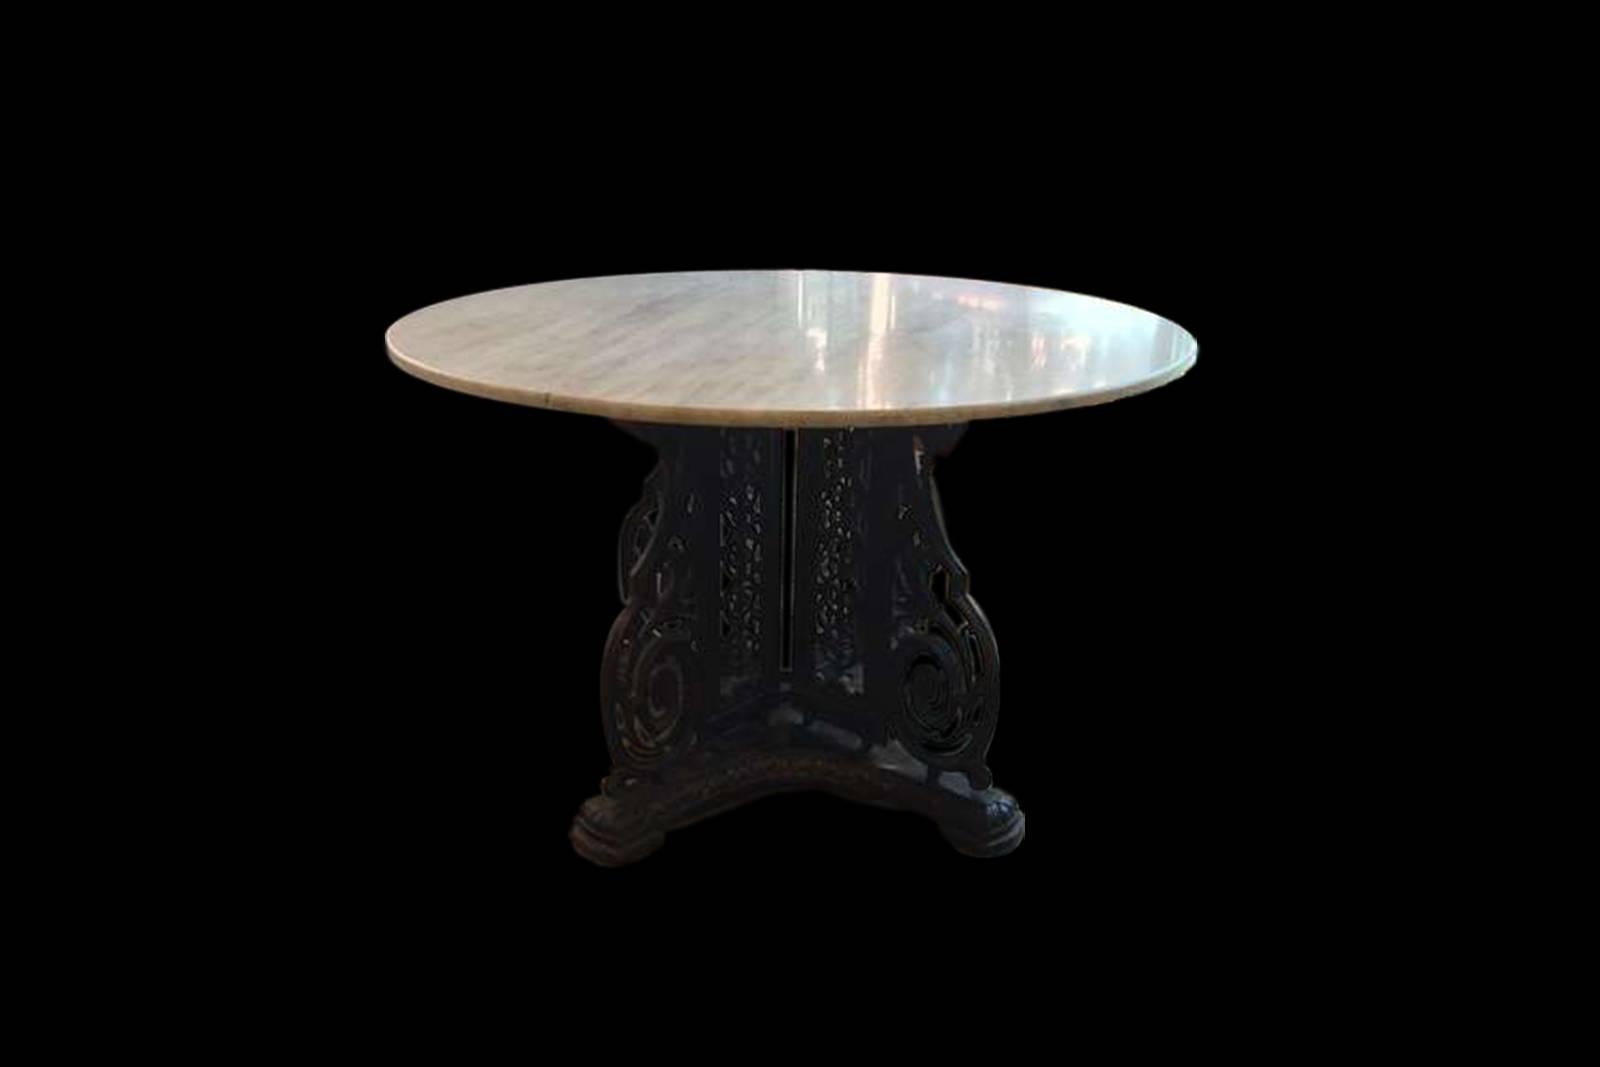 A turn of the century cast iron center table with marble top.  The base is comprised of an extremely detailed iron casting with an ornate wooden plinth below.  This is an extremely elegant and unique piece that would be a fabulous statement in the